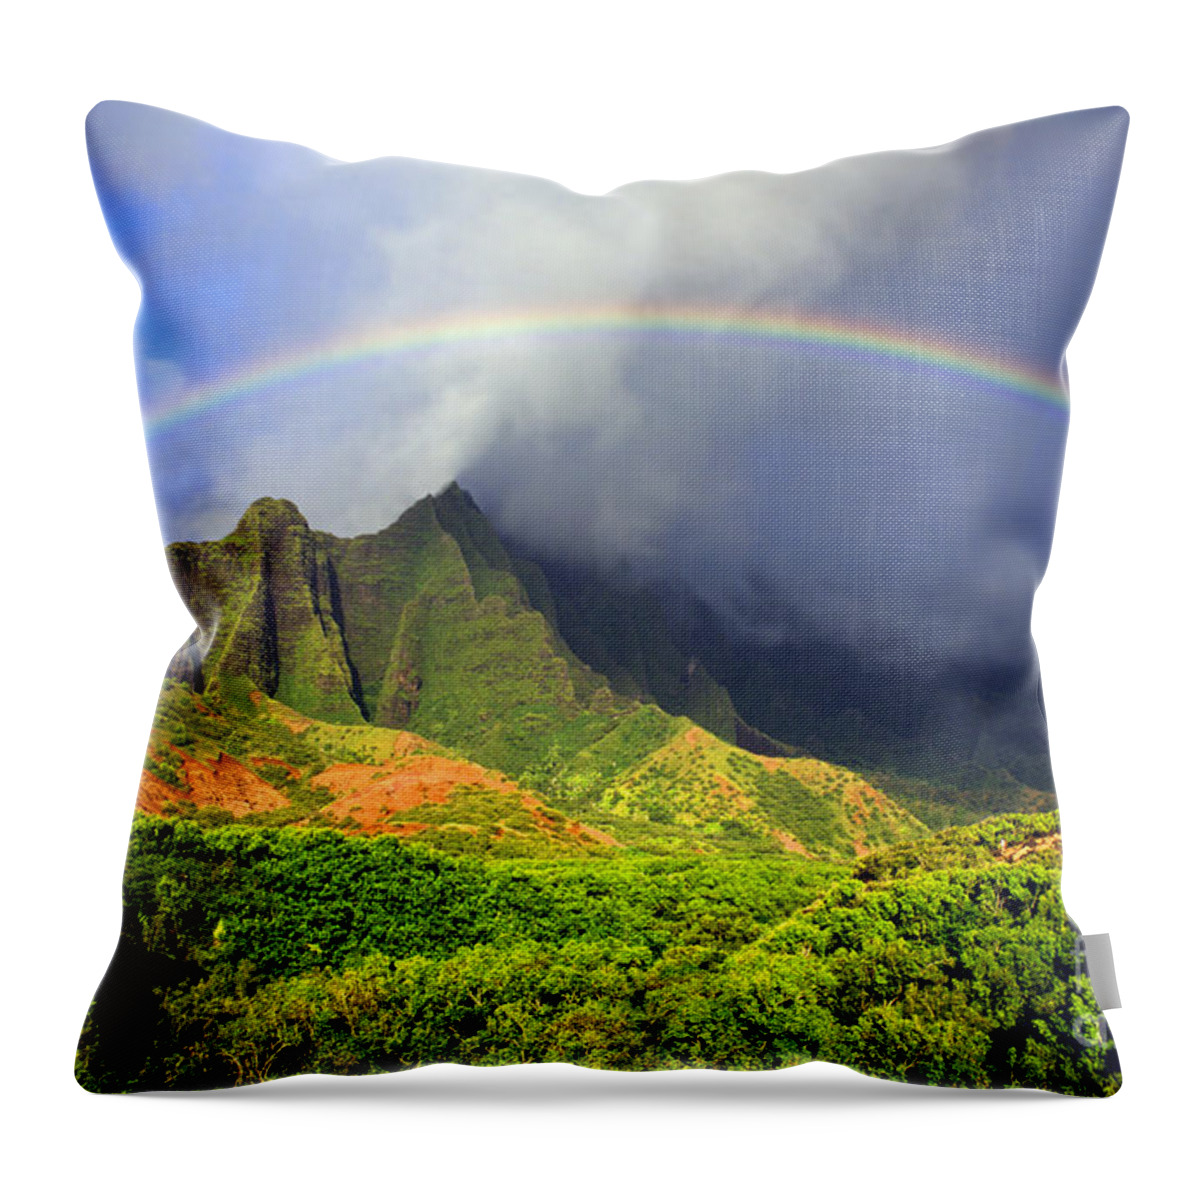 #faatoppicks Throw Pillow featuring the photograph Kalalau Valley Rainbow by Kevin Smith